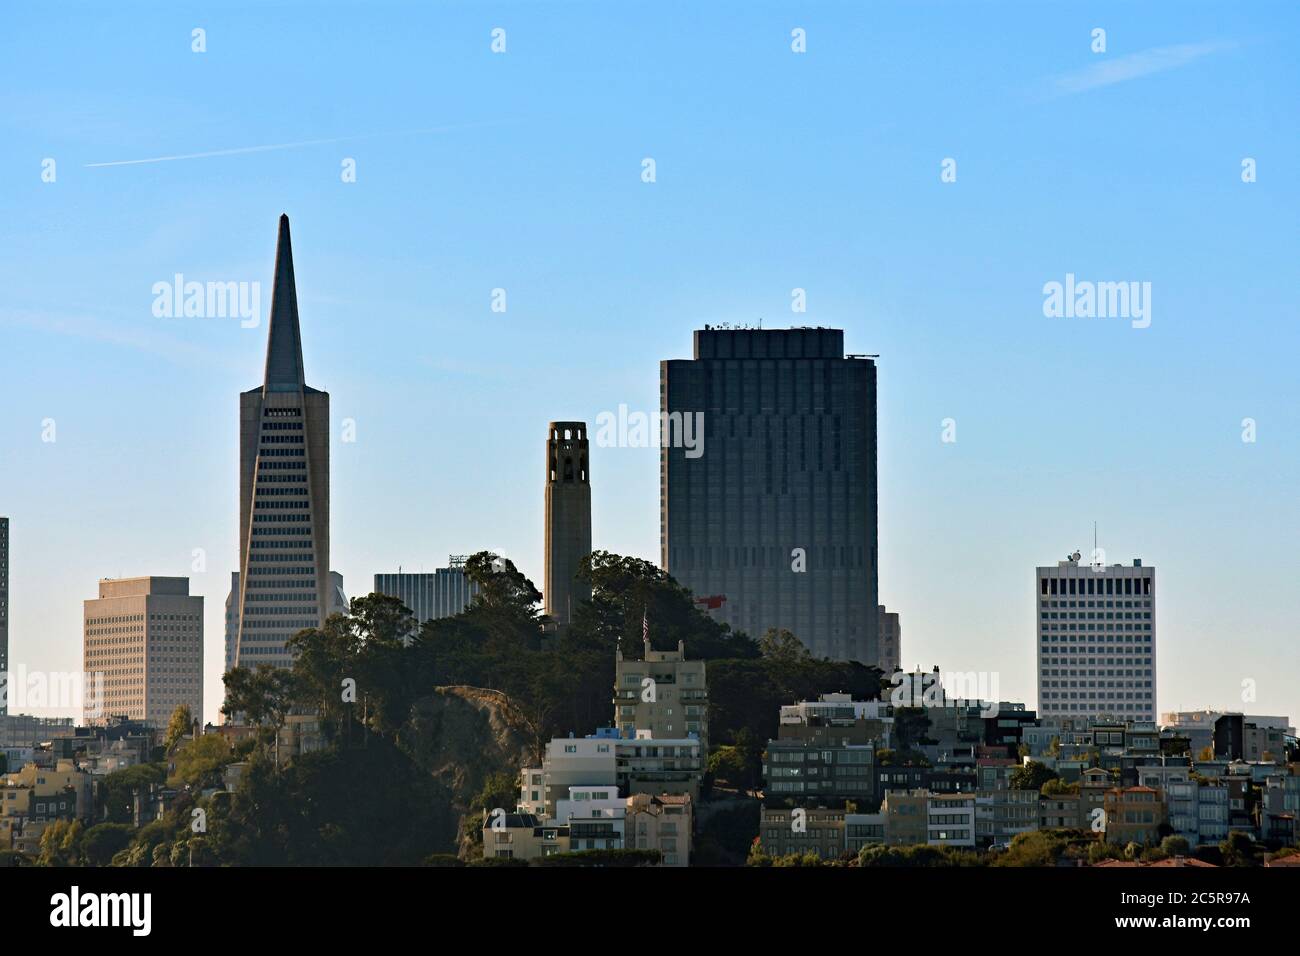 Coit Tower on Telegraph Hill, The Transamerica Pyramid and downtown city skyline seen from the San Francisco Bay at sunset.  San Francisco, California. Stock Photo